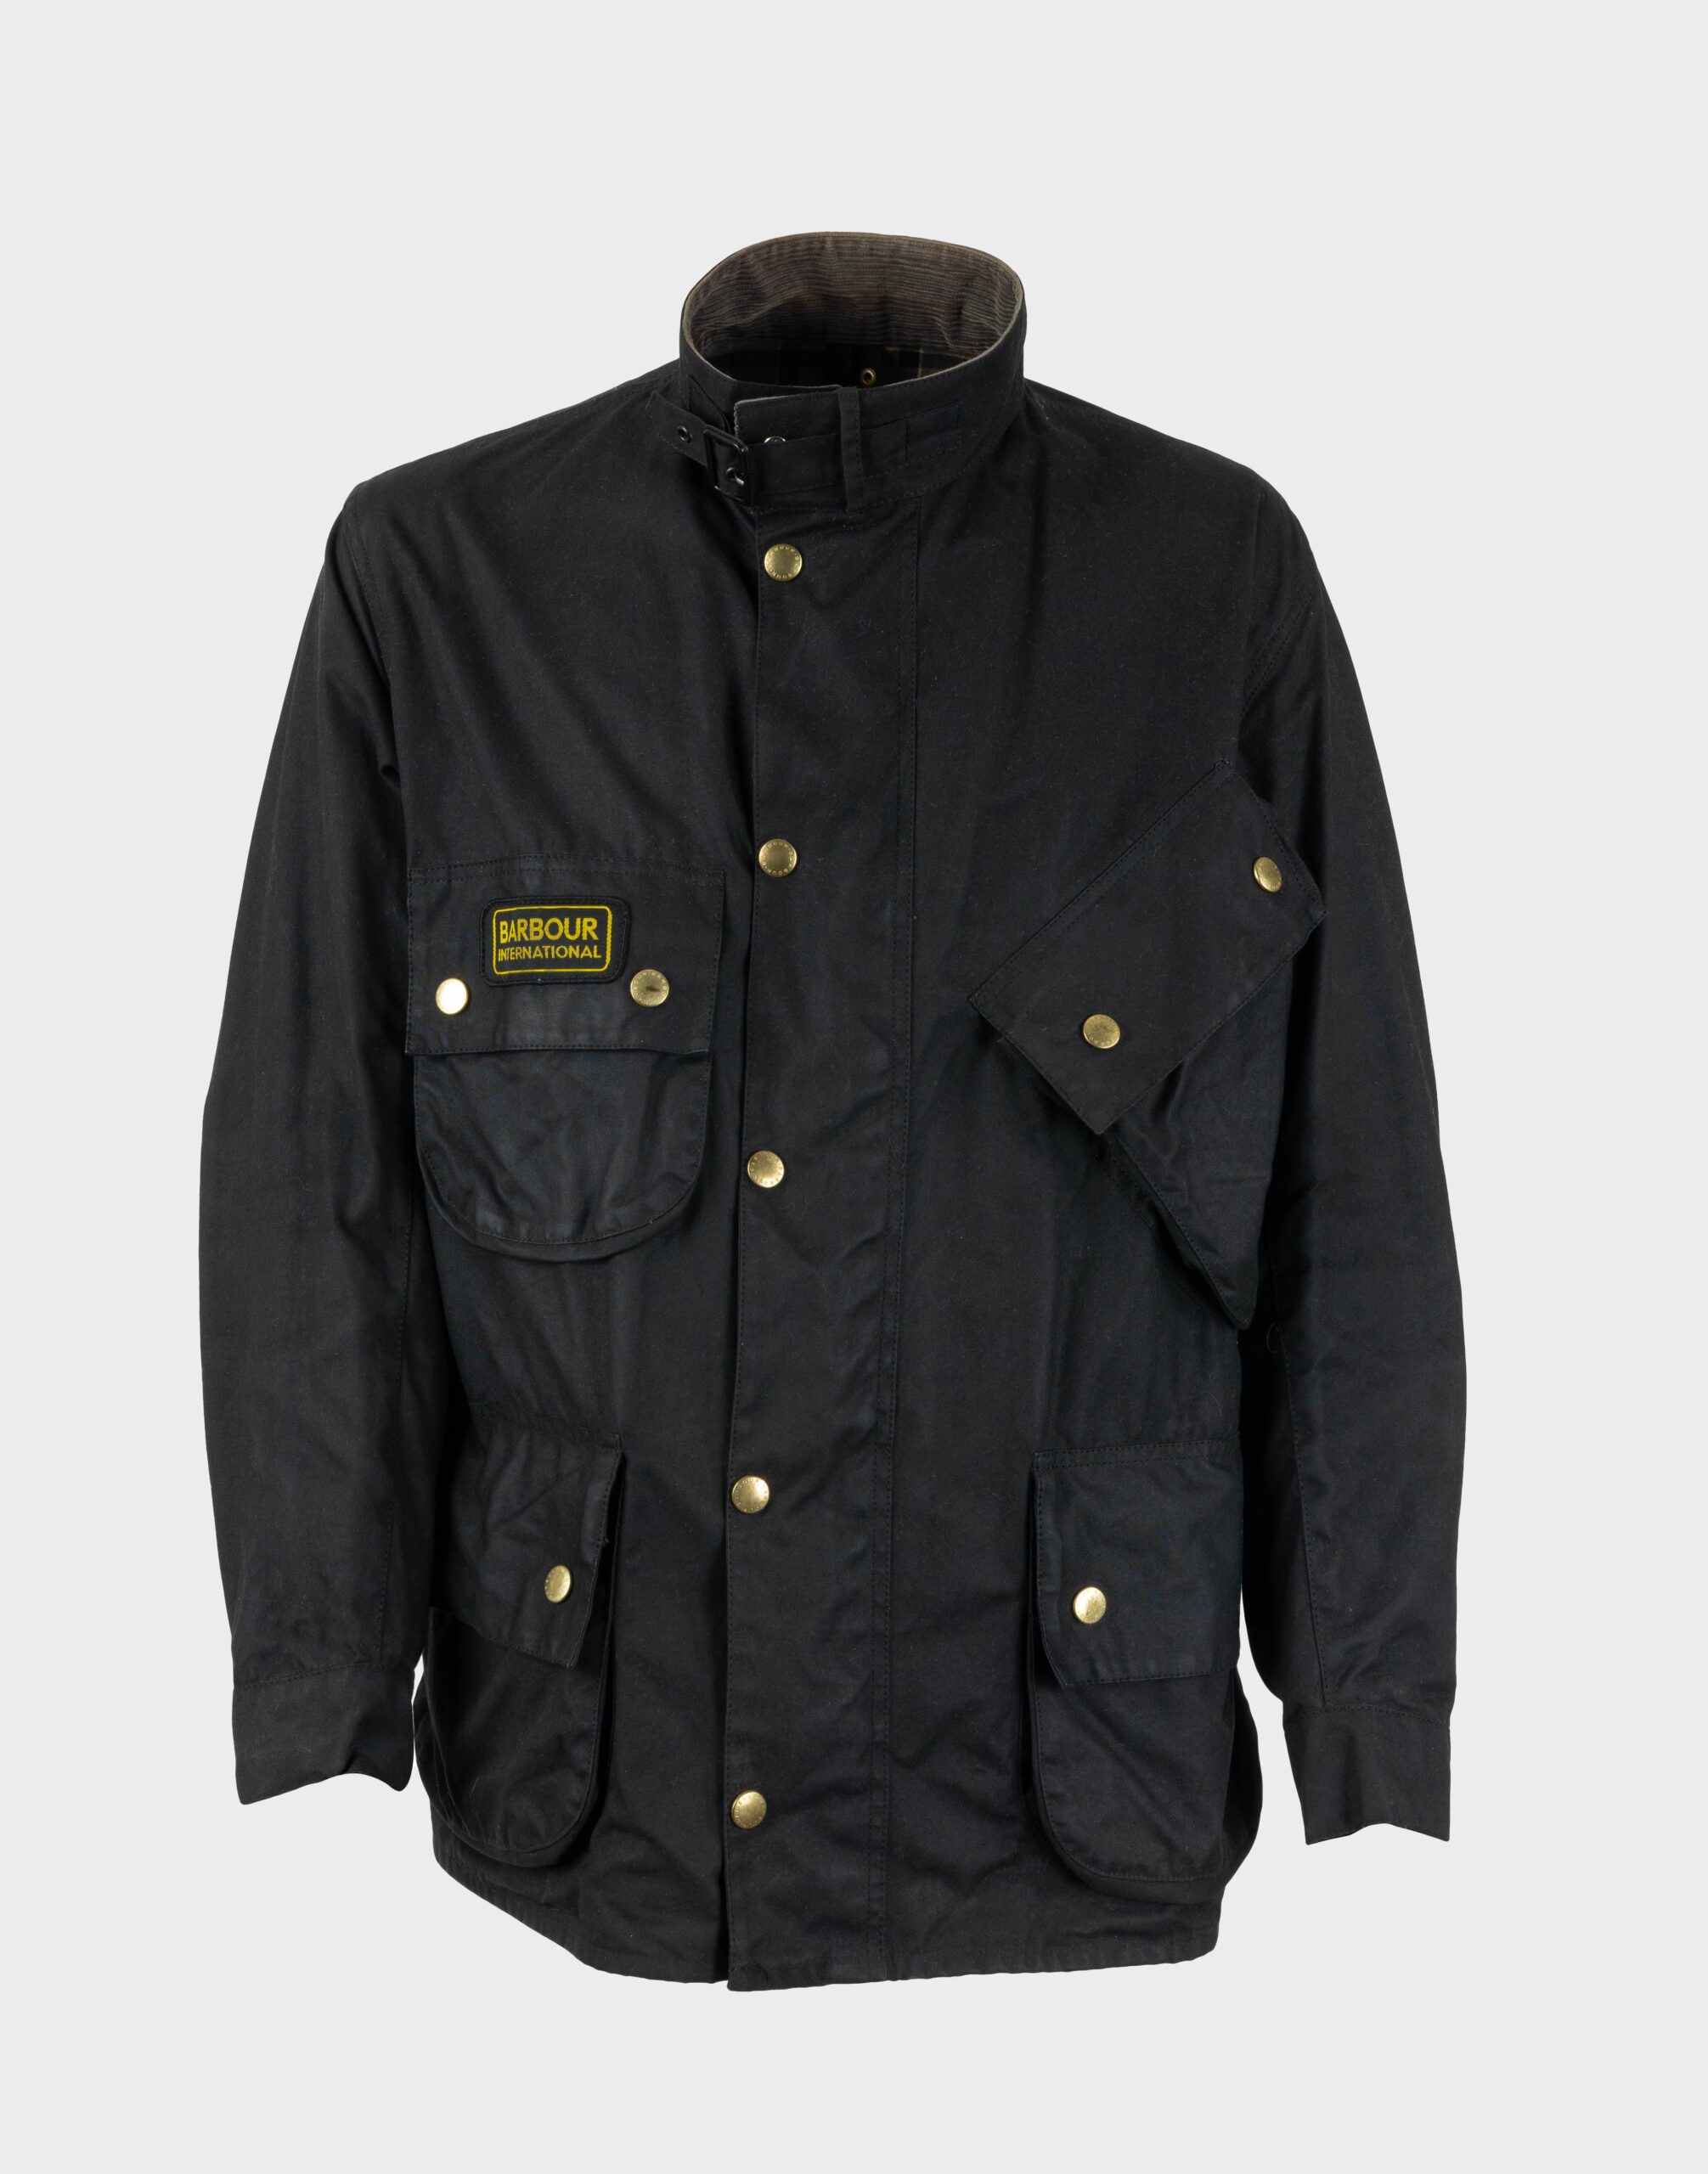 barbour international black men's waxed fabric jacket with four front pockets, front closure with gold buttons